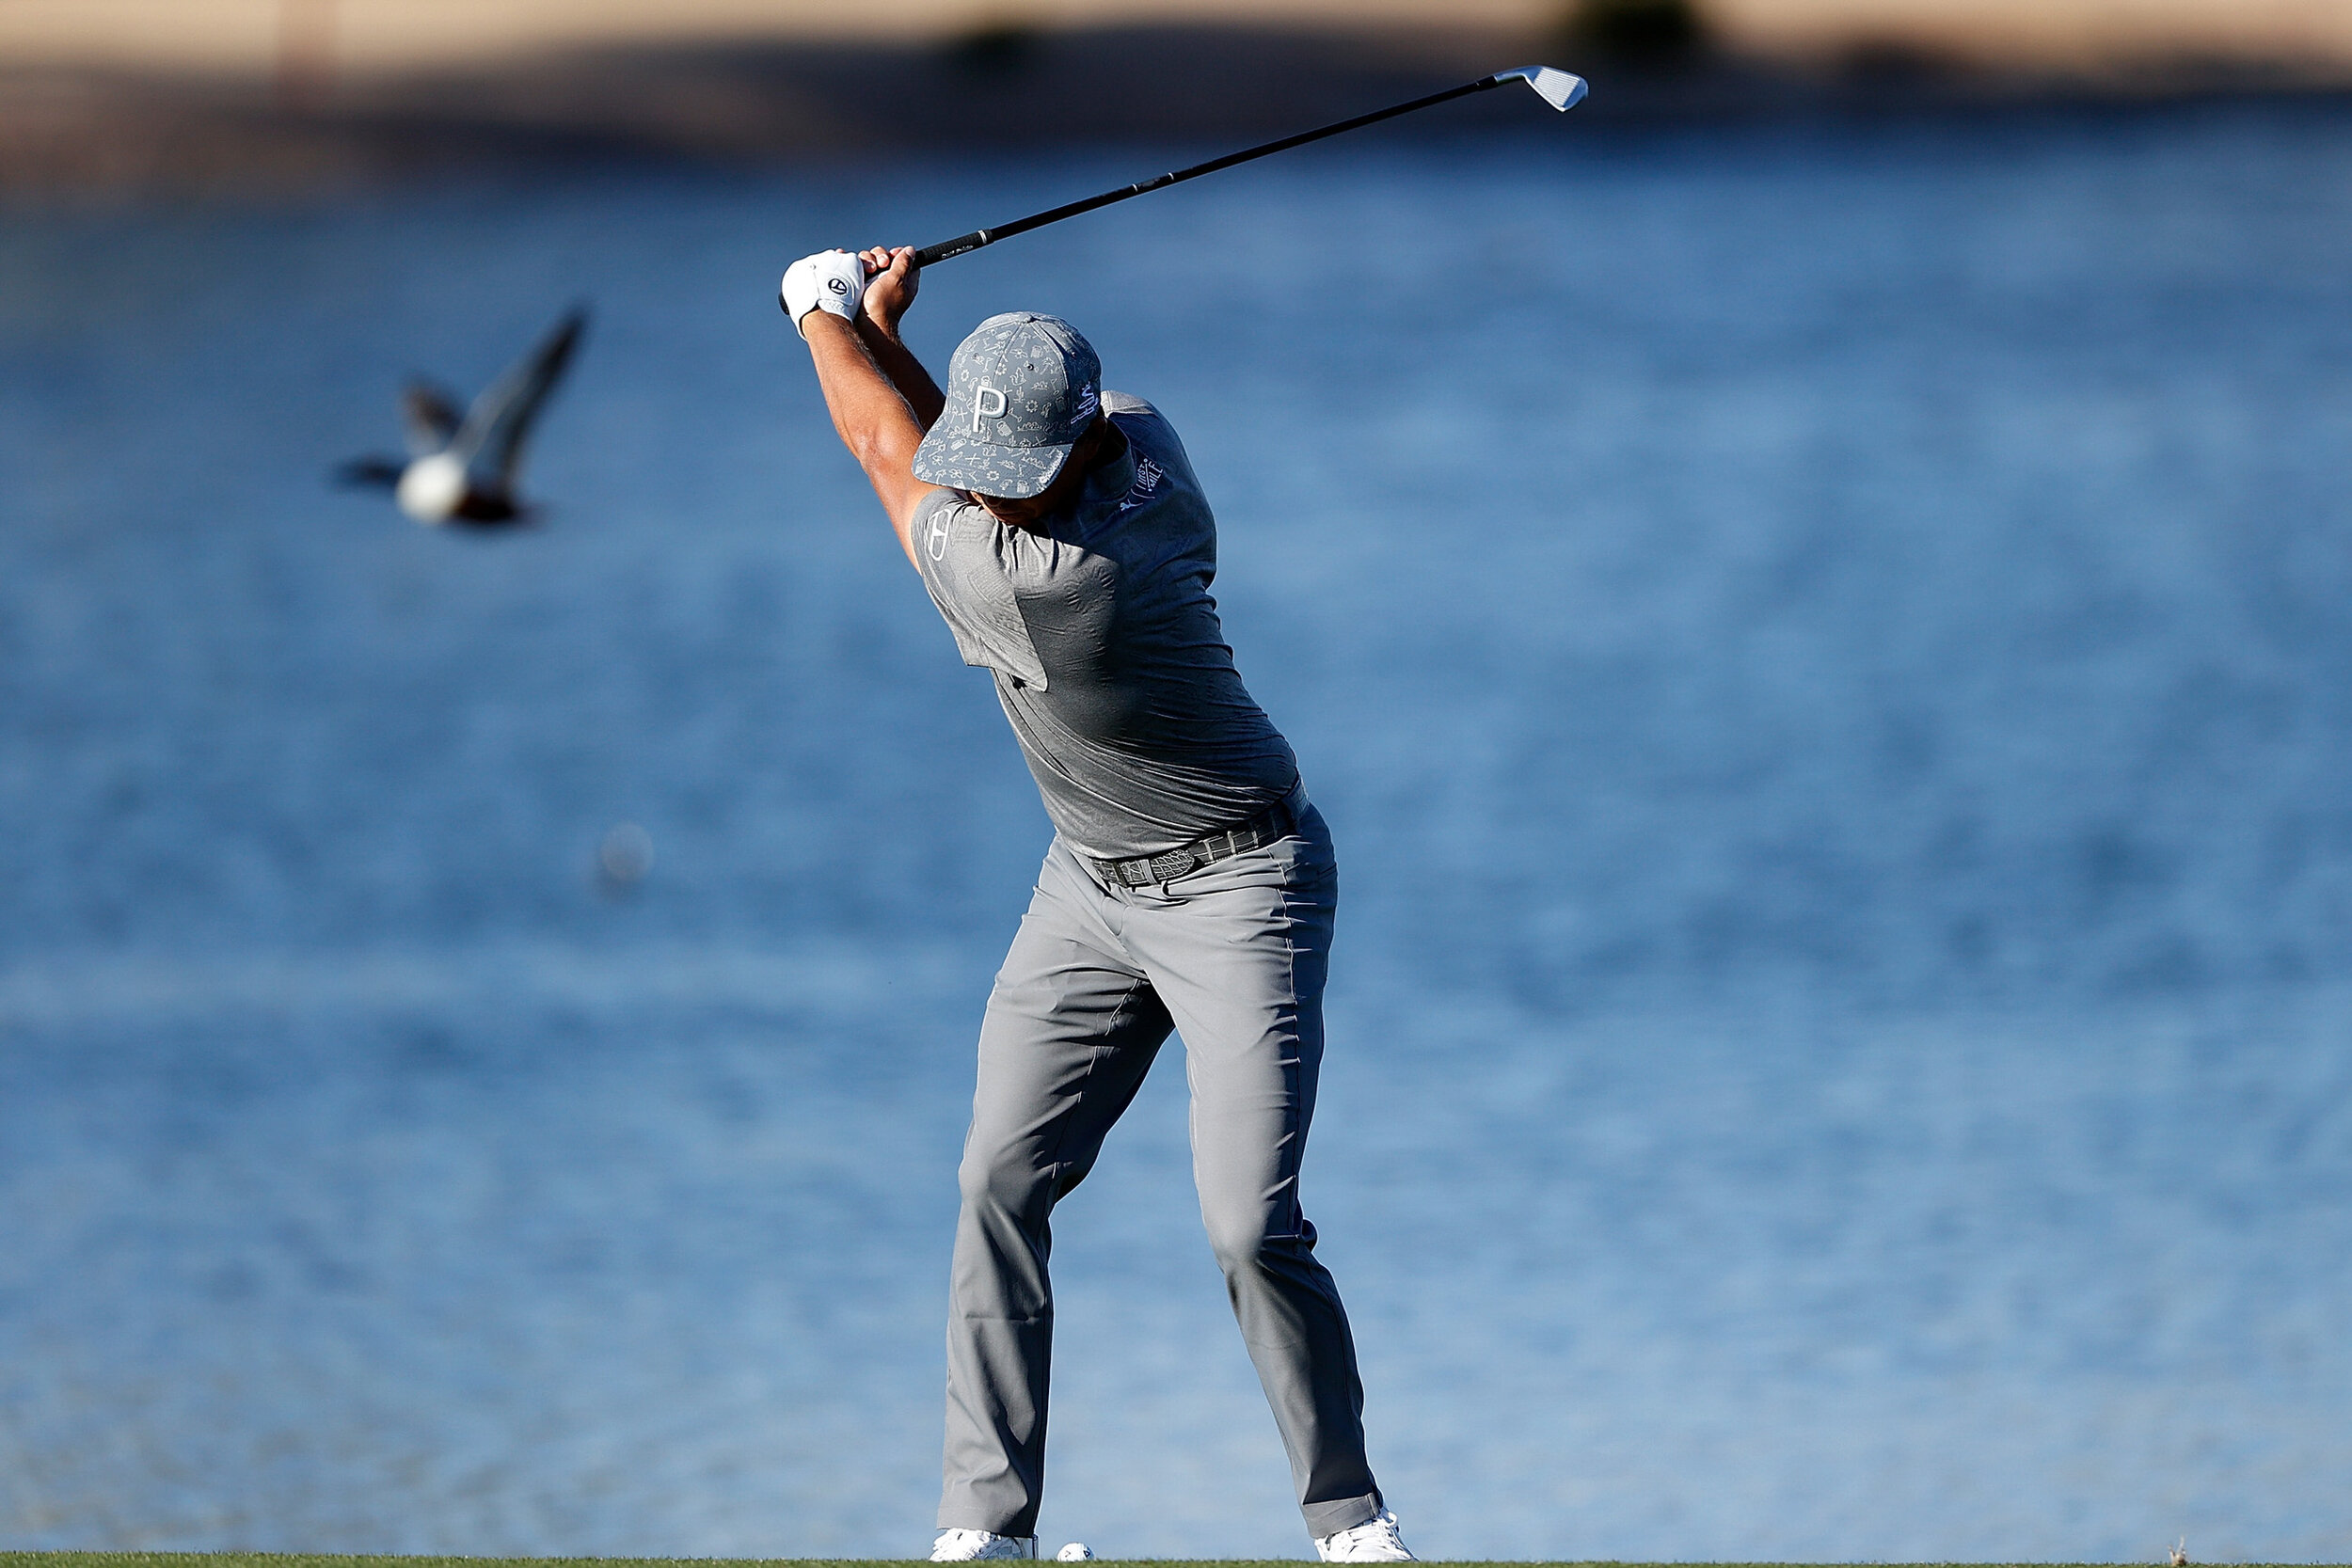  SCOTTSDALE, ARIZONA - FEBRUARY 05: Rickie Fowler of the United States hits his second shot on the 15th hole during the second round of the Waste Management Phoenix Open at TPC Scottsdale on February 05, 2021 in Scottsdale, Arizona. (Photo by Christi